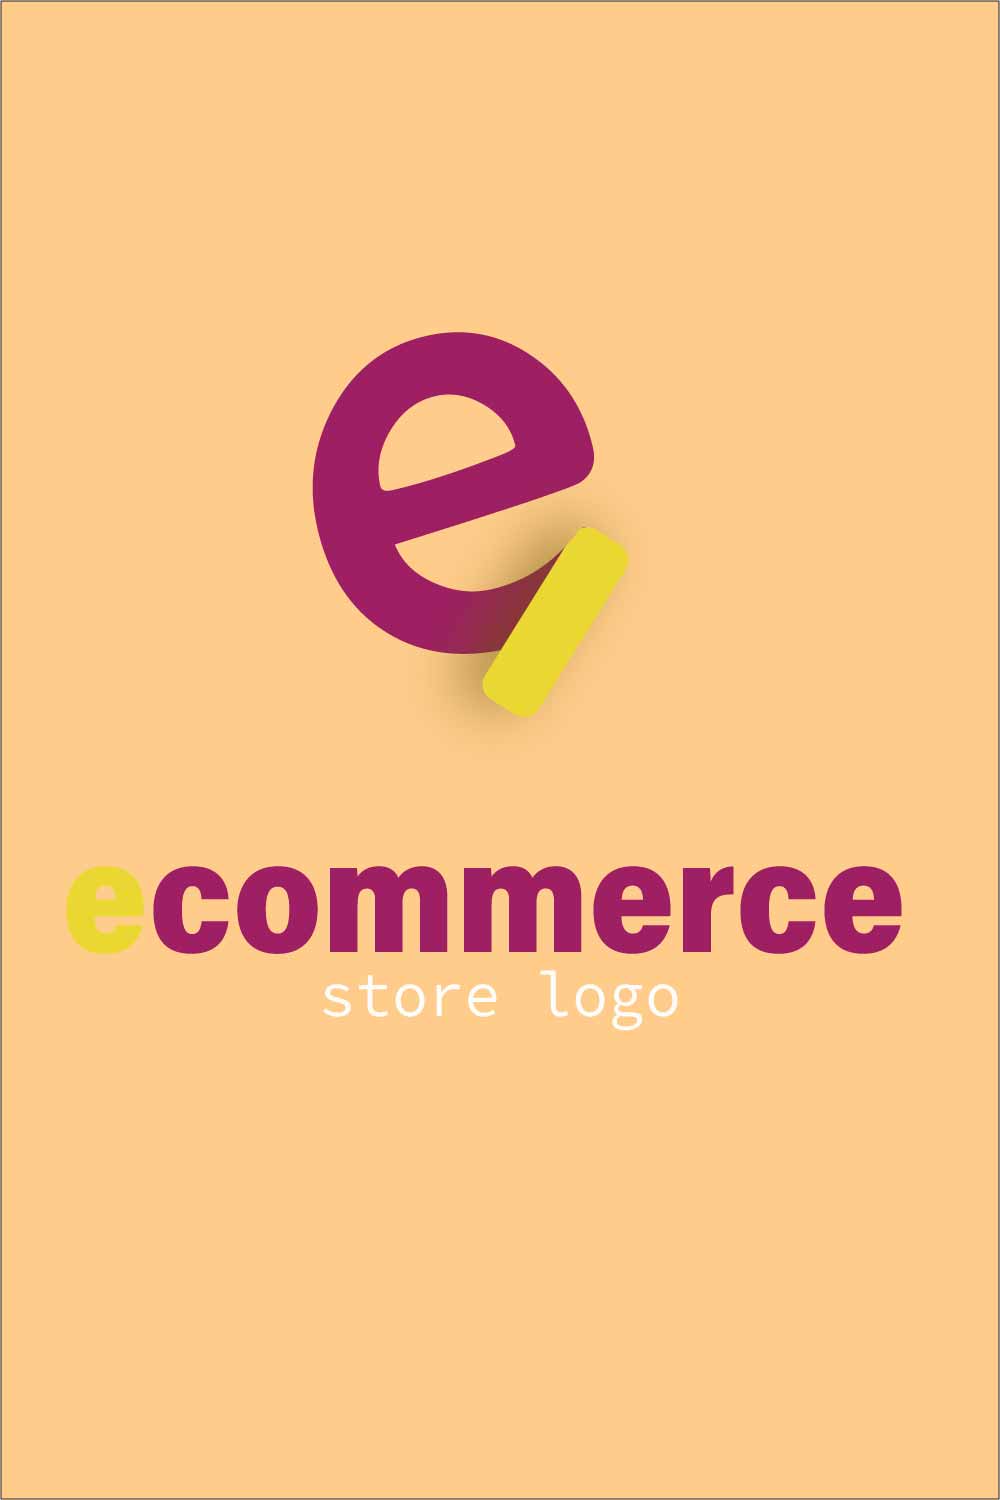 Minimal and attractive ecommerce logo icon logo pinterest preview image.